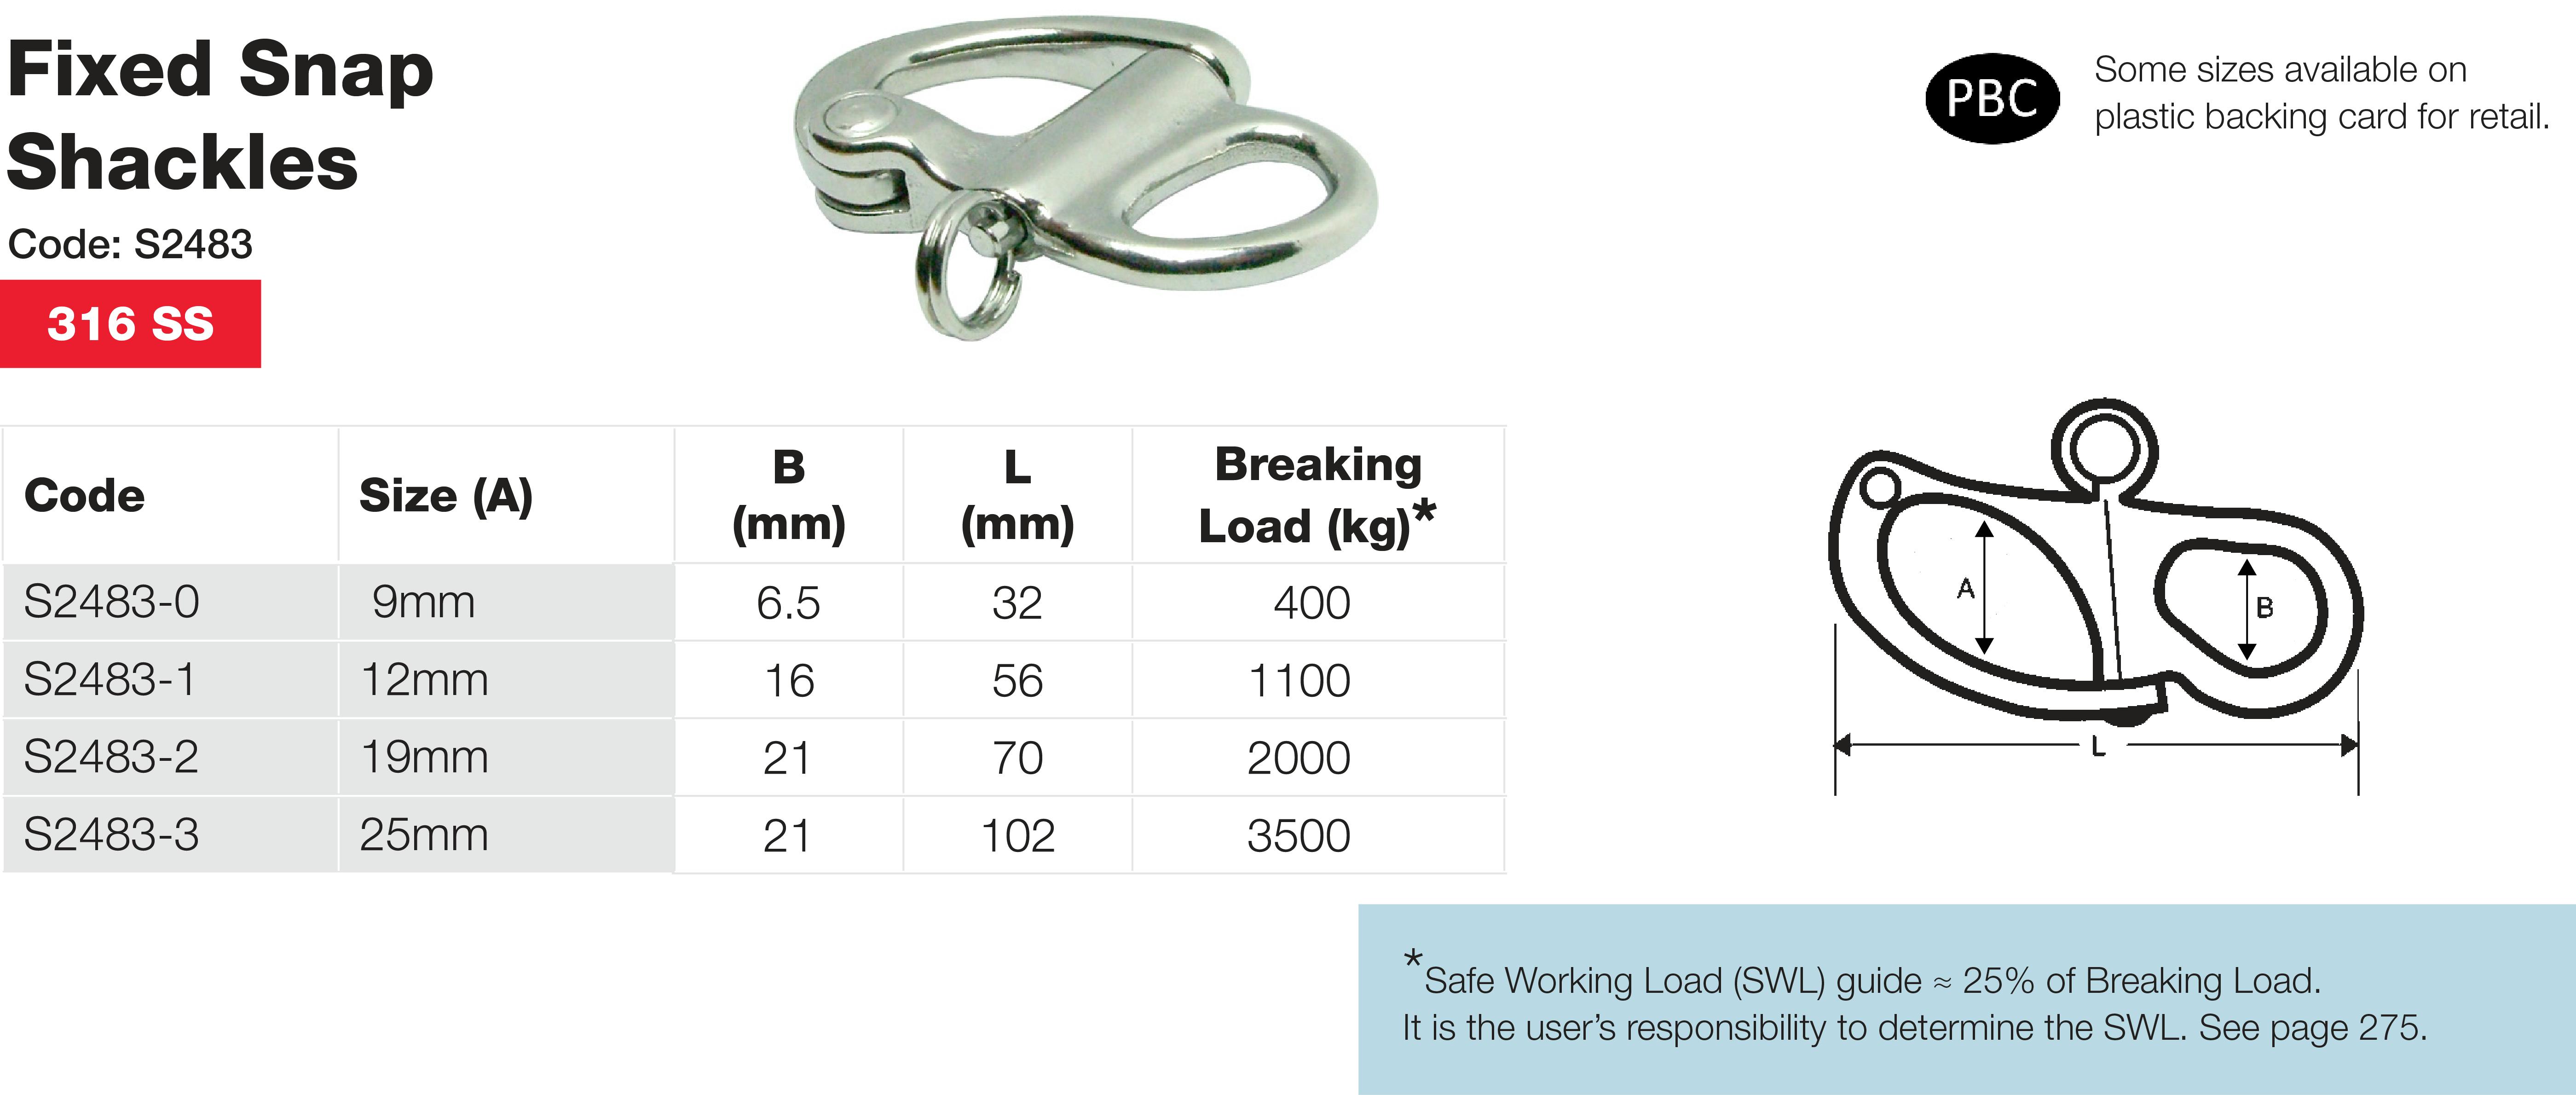 Stainless Marine Fixed Snap Shackle Performance Data